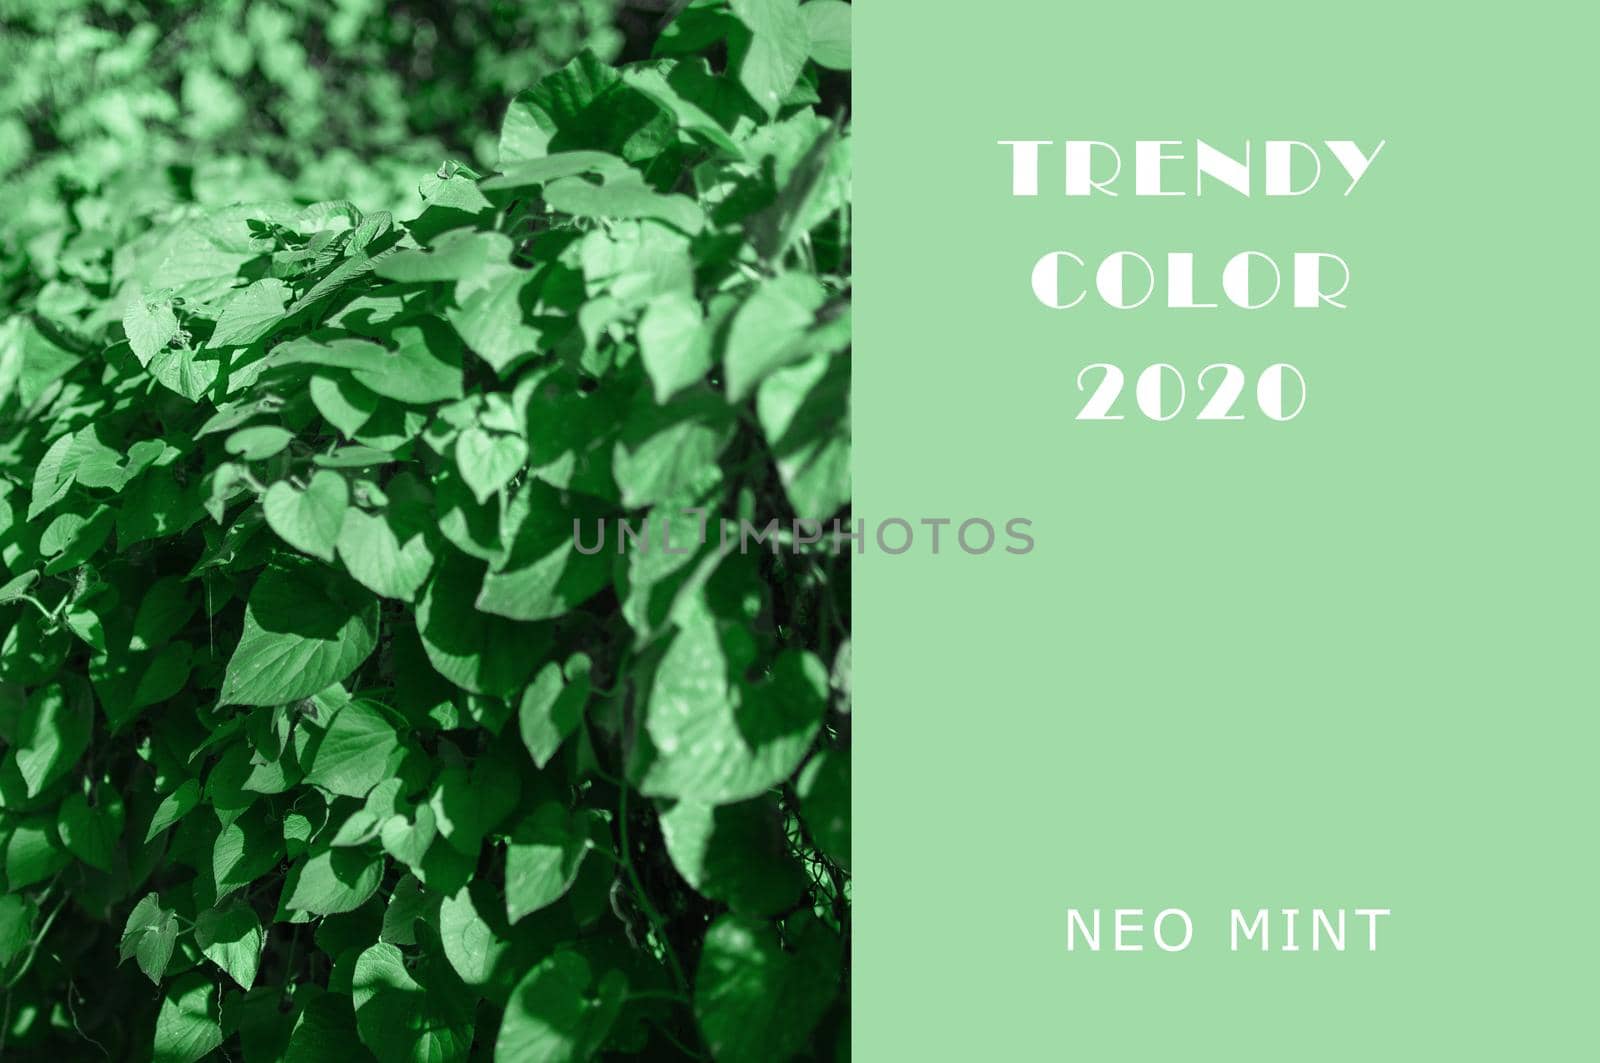 Ivy plant in Neo Mint color. Juicy tones in a new mint color. Abstract light green background with vibrant colors. Copy space layout for design by Alla_Morozova93